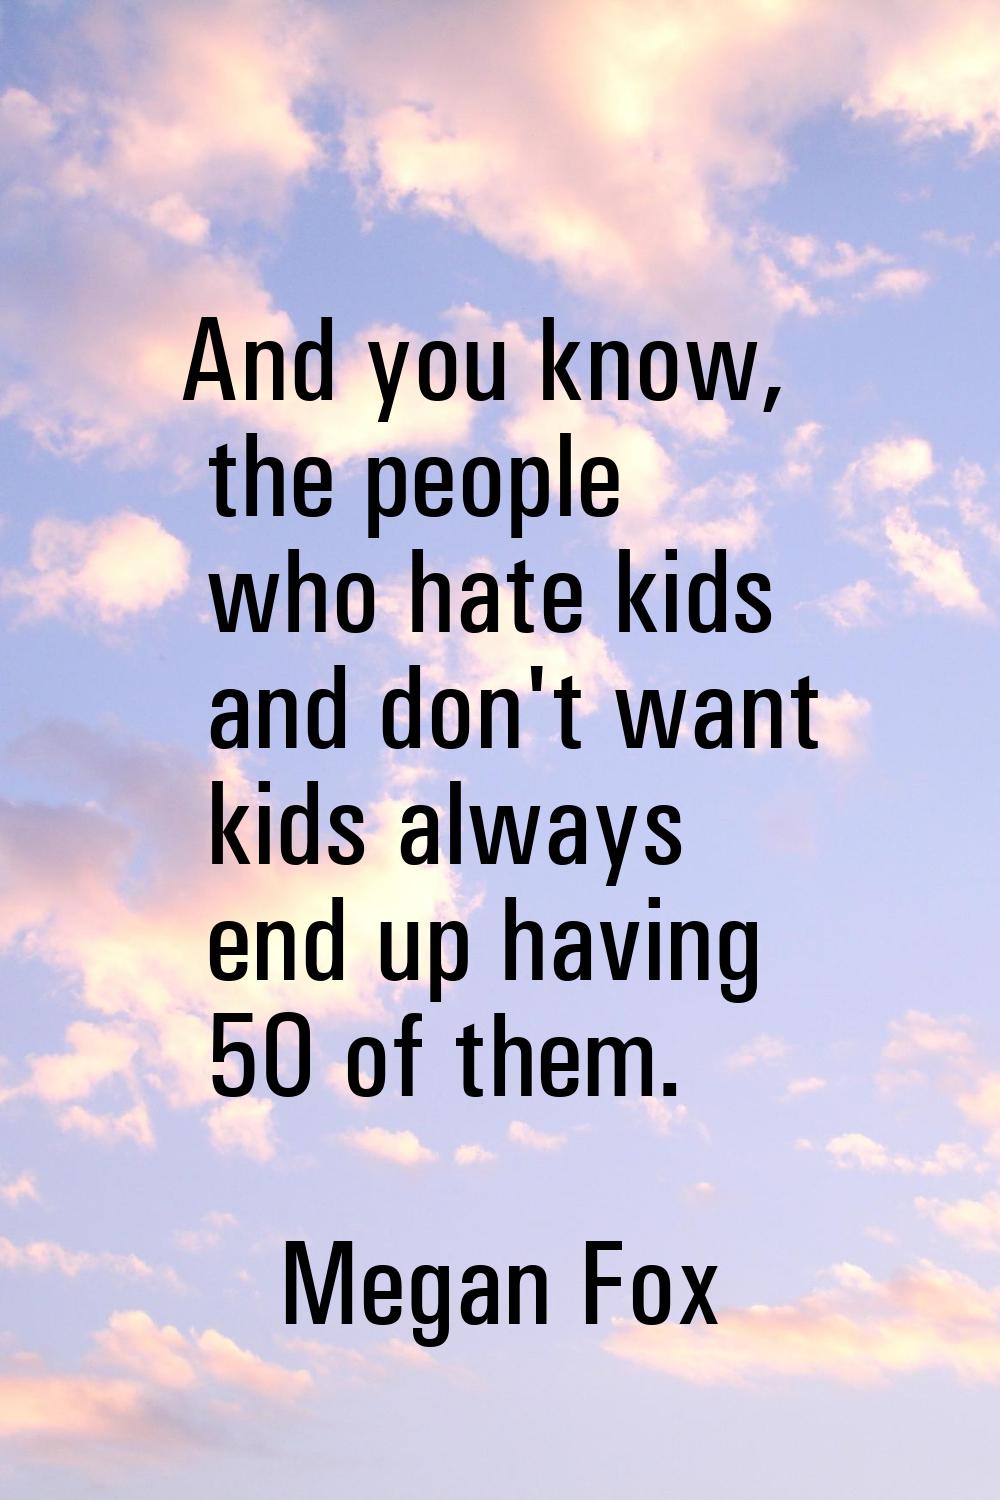 And you know, the people who hate kids and don't want kids always end up having 50 of them.